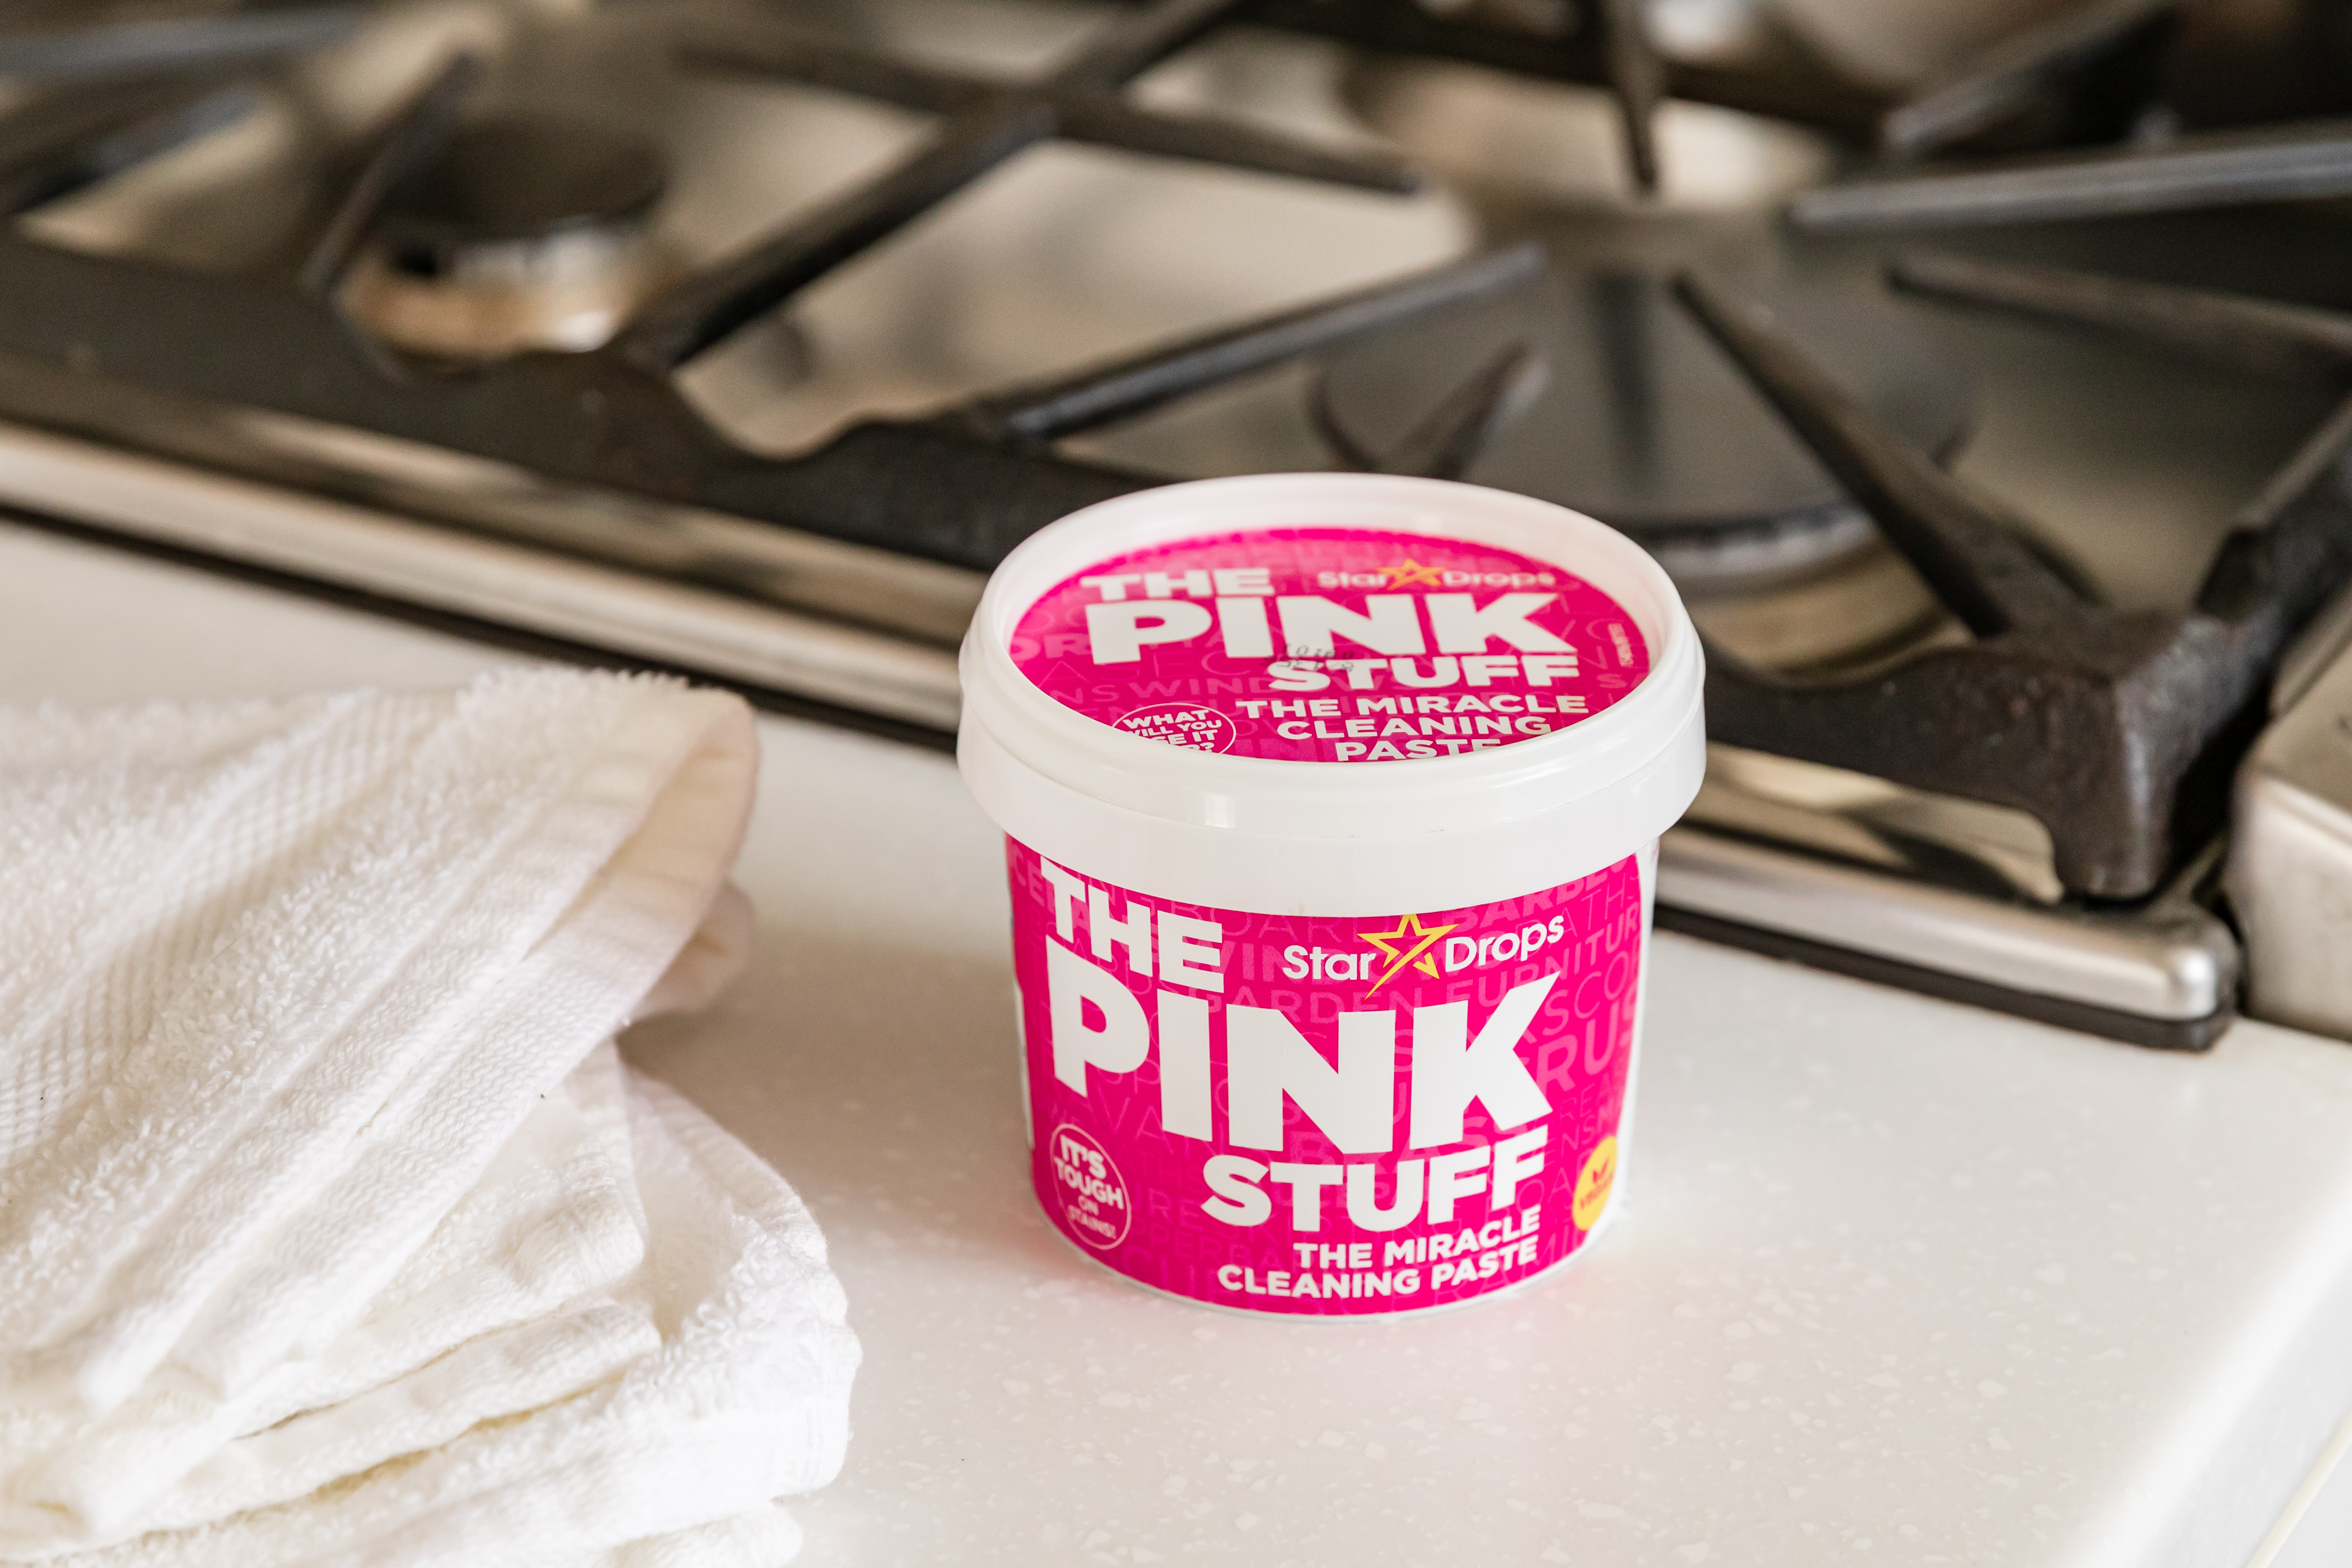 How to Use the Pink Stuff to Clean Oven Racks